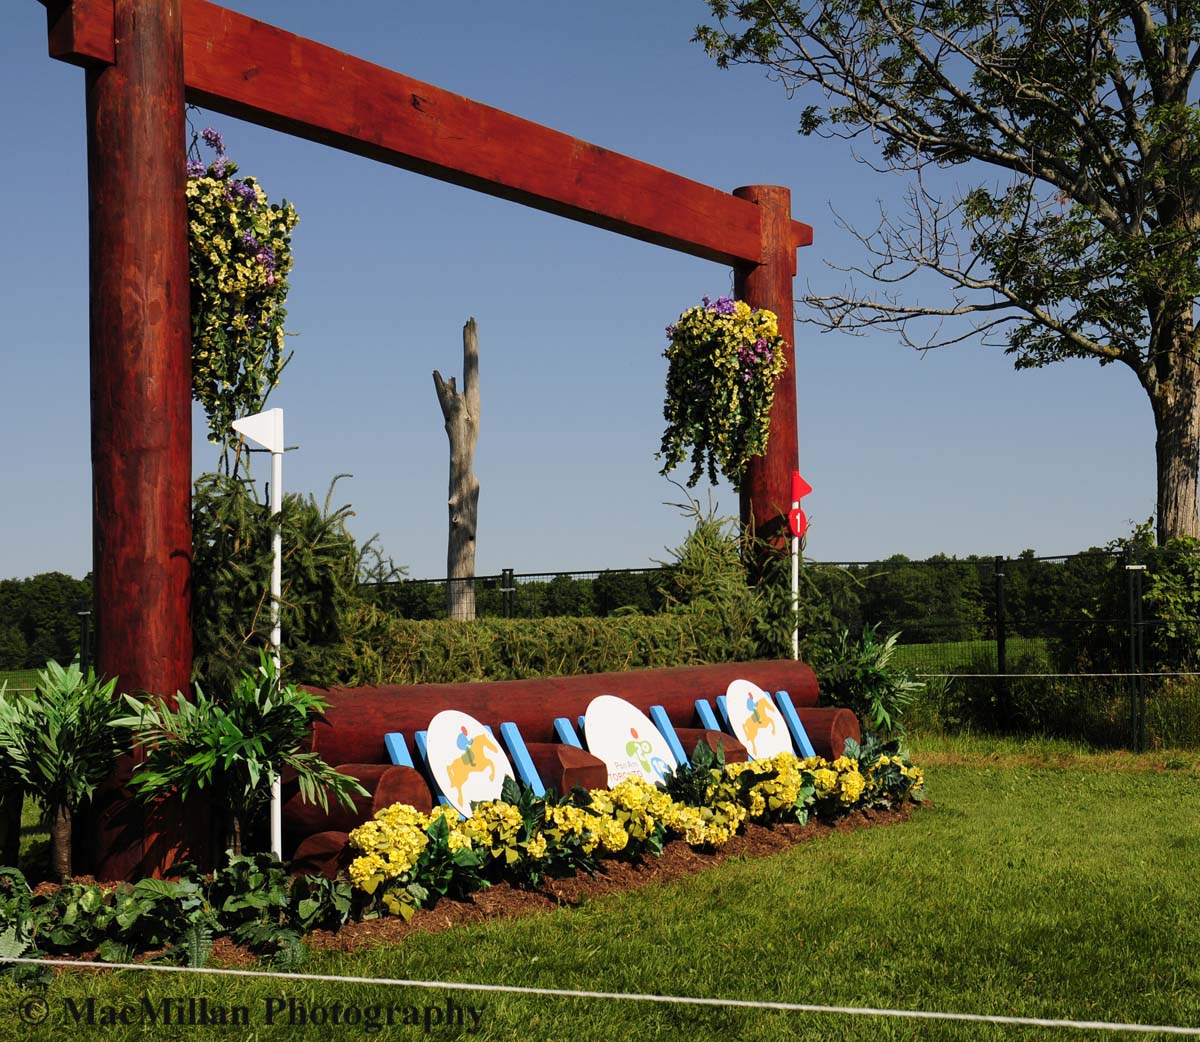 PanAm Eventing Preview